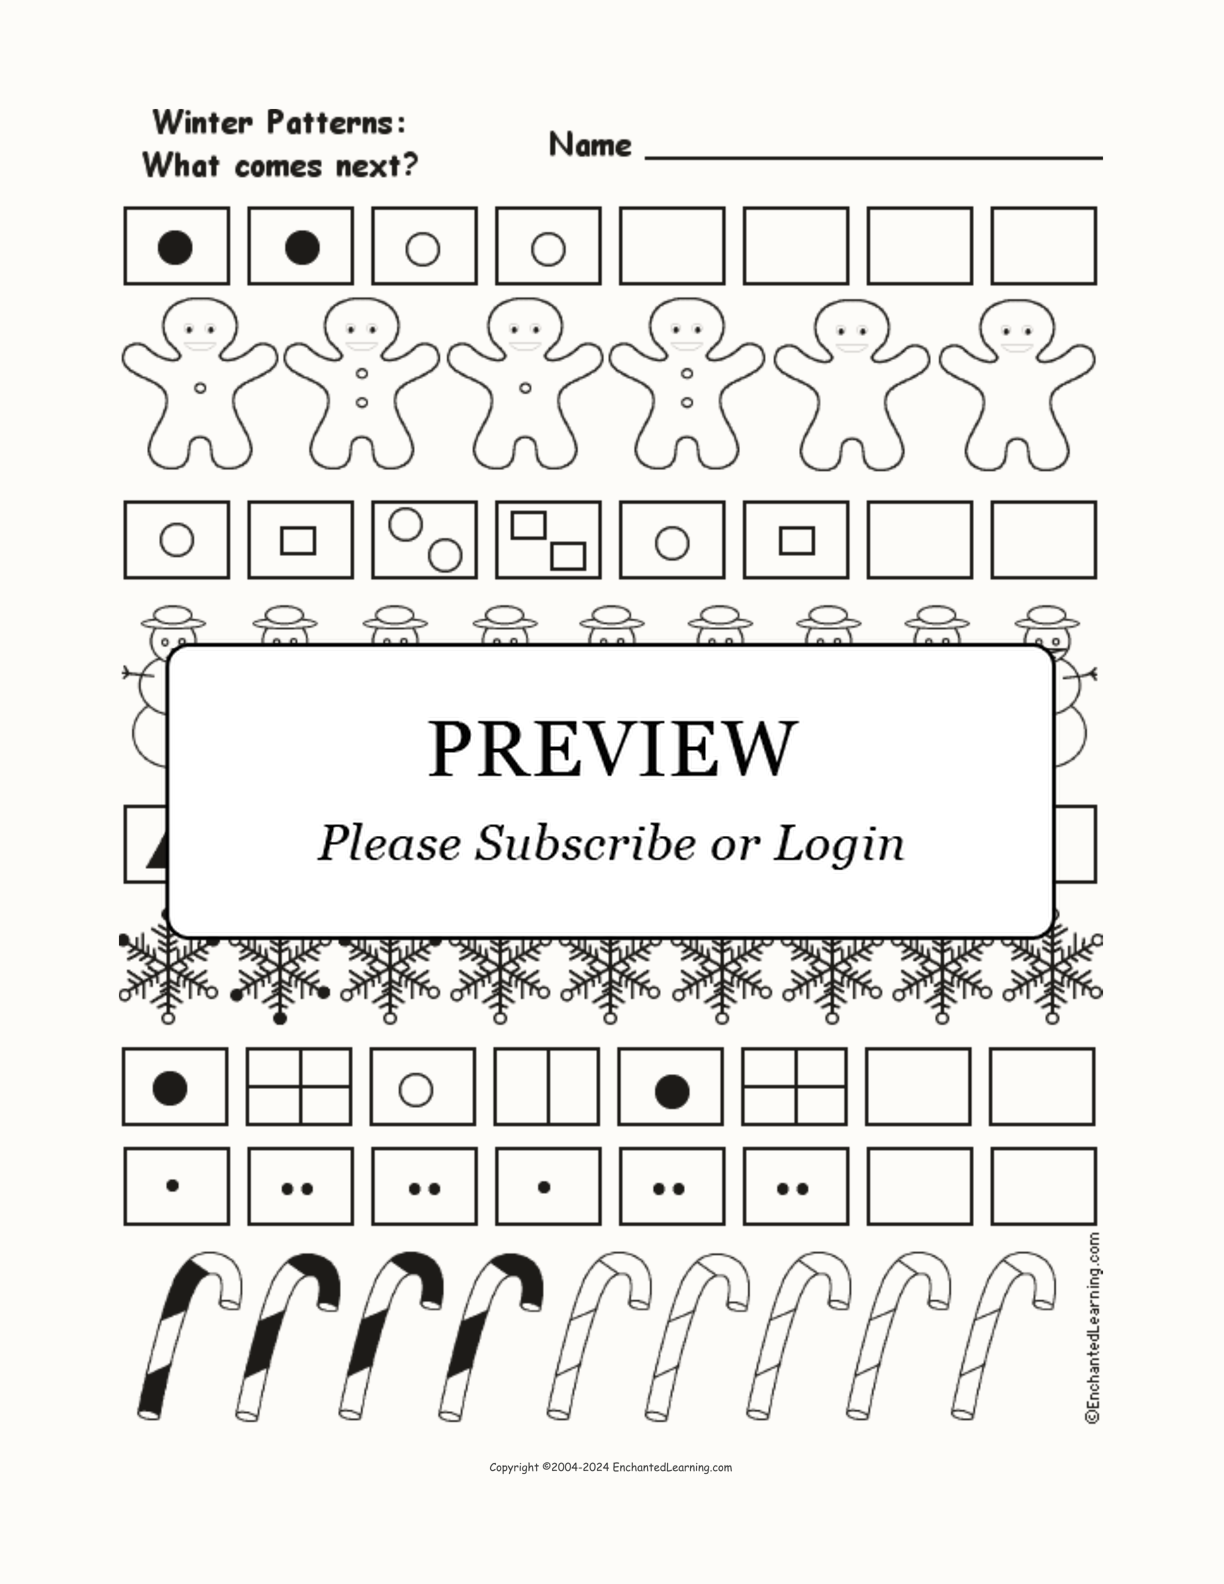 Winter Patterns: What Comes Next? interactive worksheet page 1